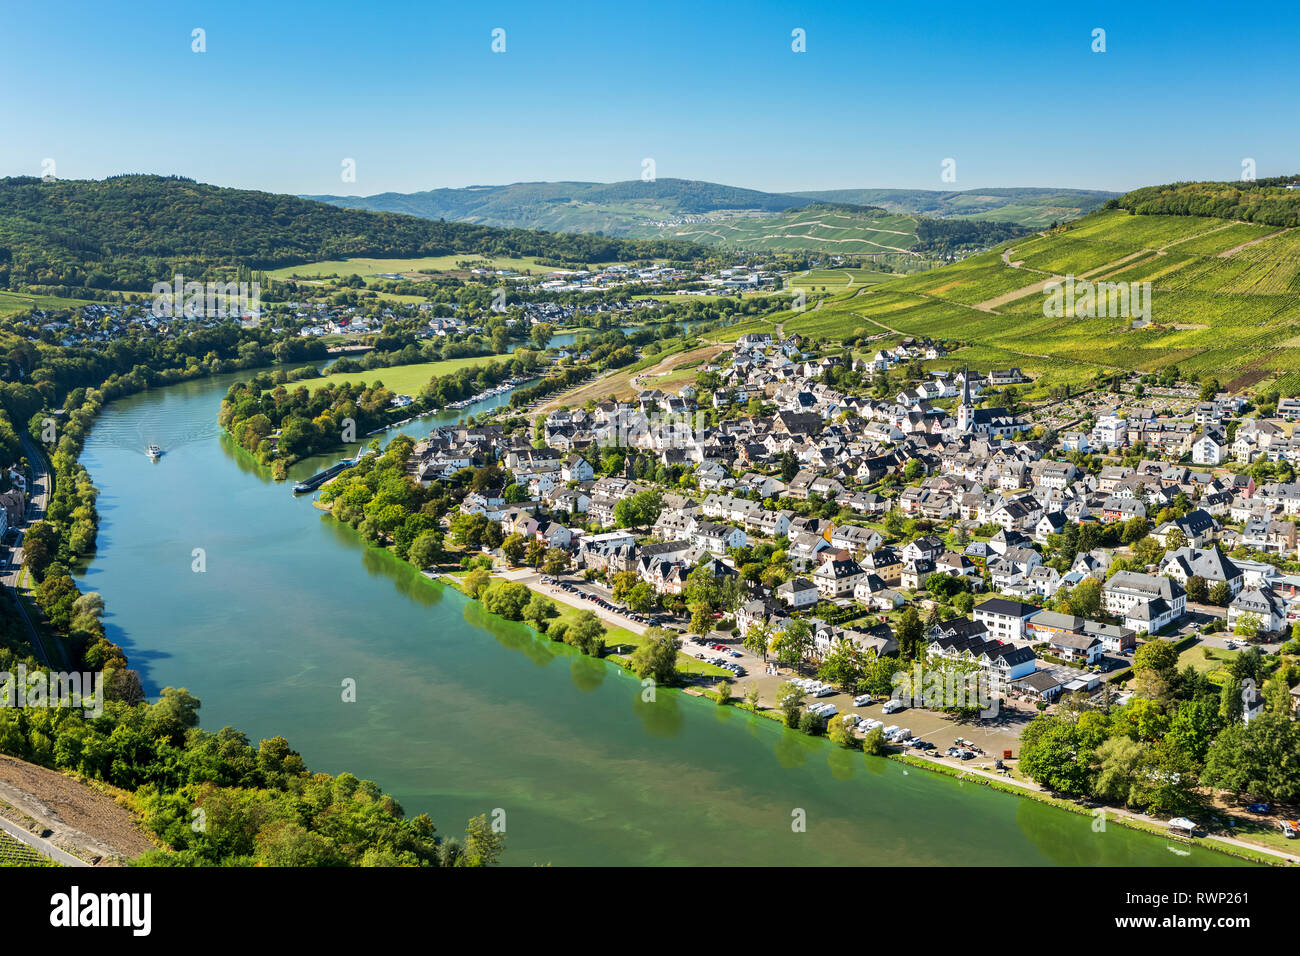 View of riverside village with bend in the river and steep vineyard slopes in the background and blue sky; Bernkastel, Germany Stock Photo